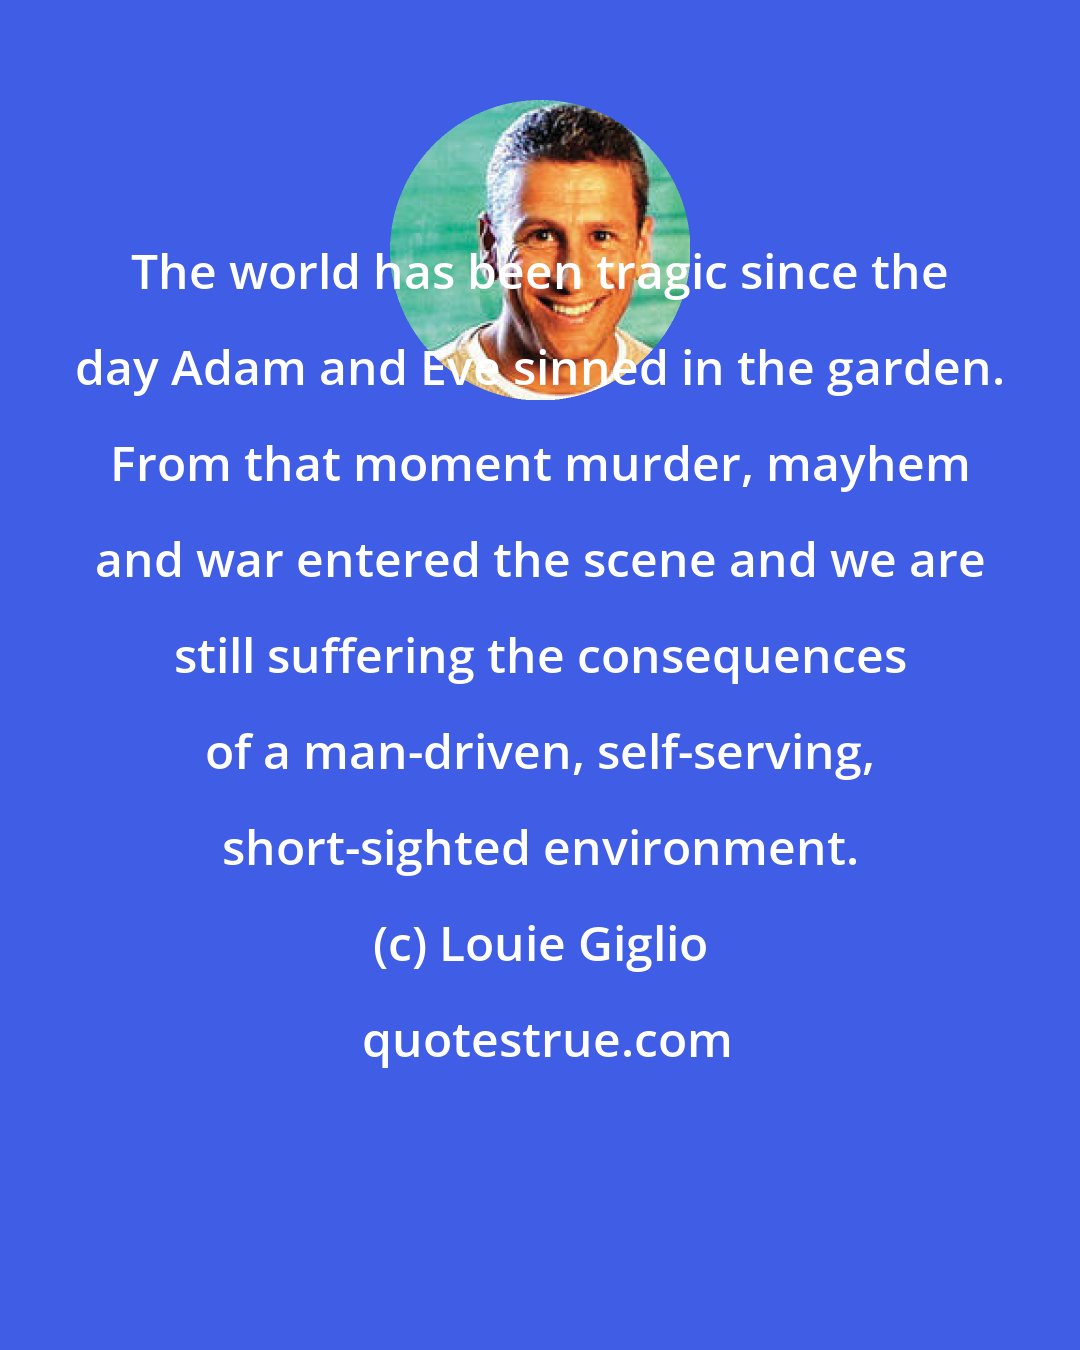 Louie Giglio: The world has been tragic since the day Adam and Eve sinned in the garden. From that moment murder, mayhem and war entered the scene and we are still suffering the consequences of a man-driven, self-serving, short-sighted environment.